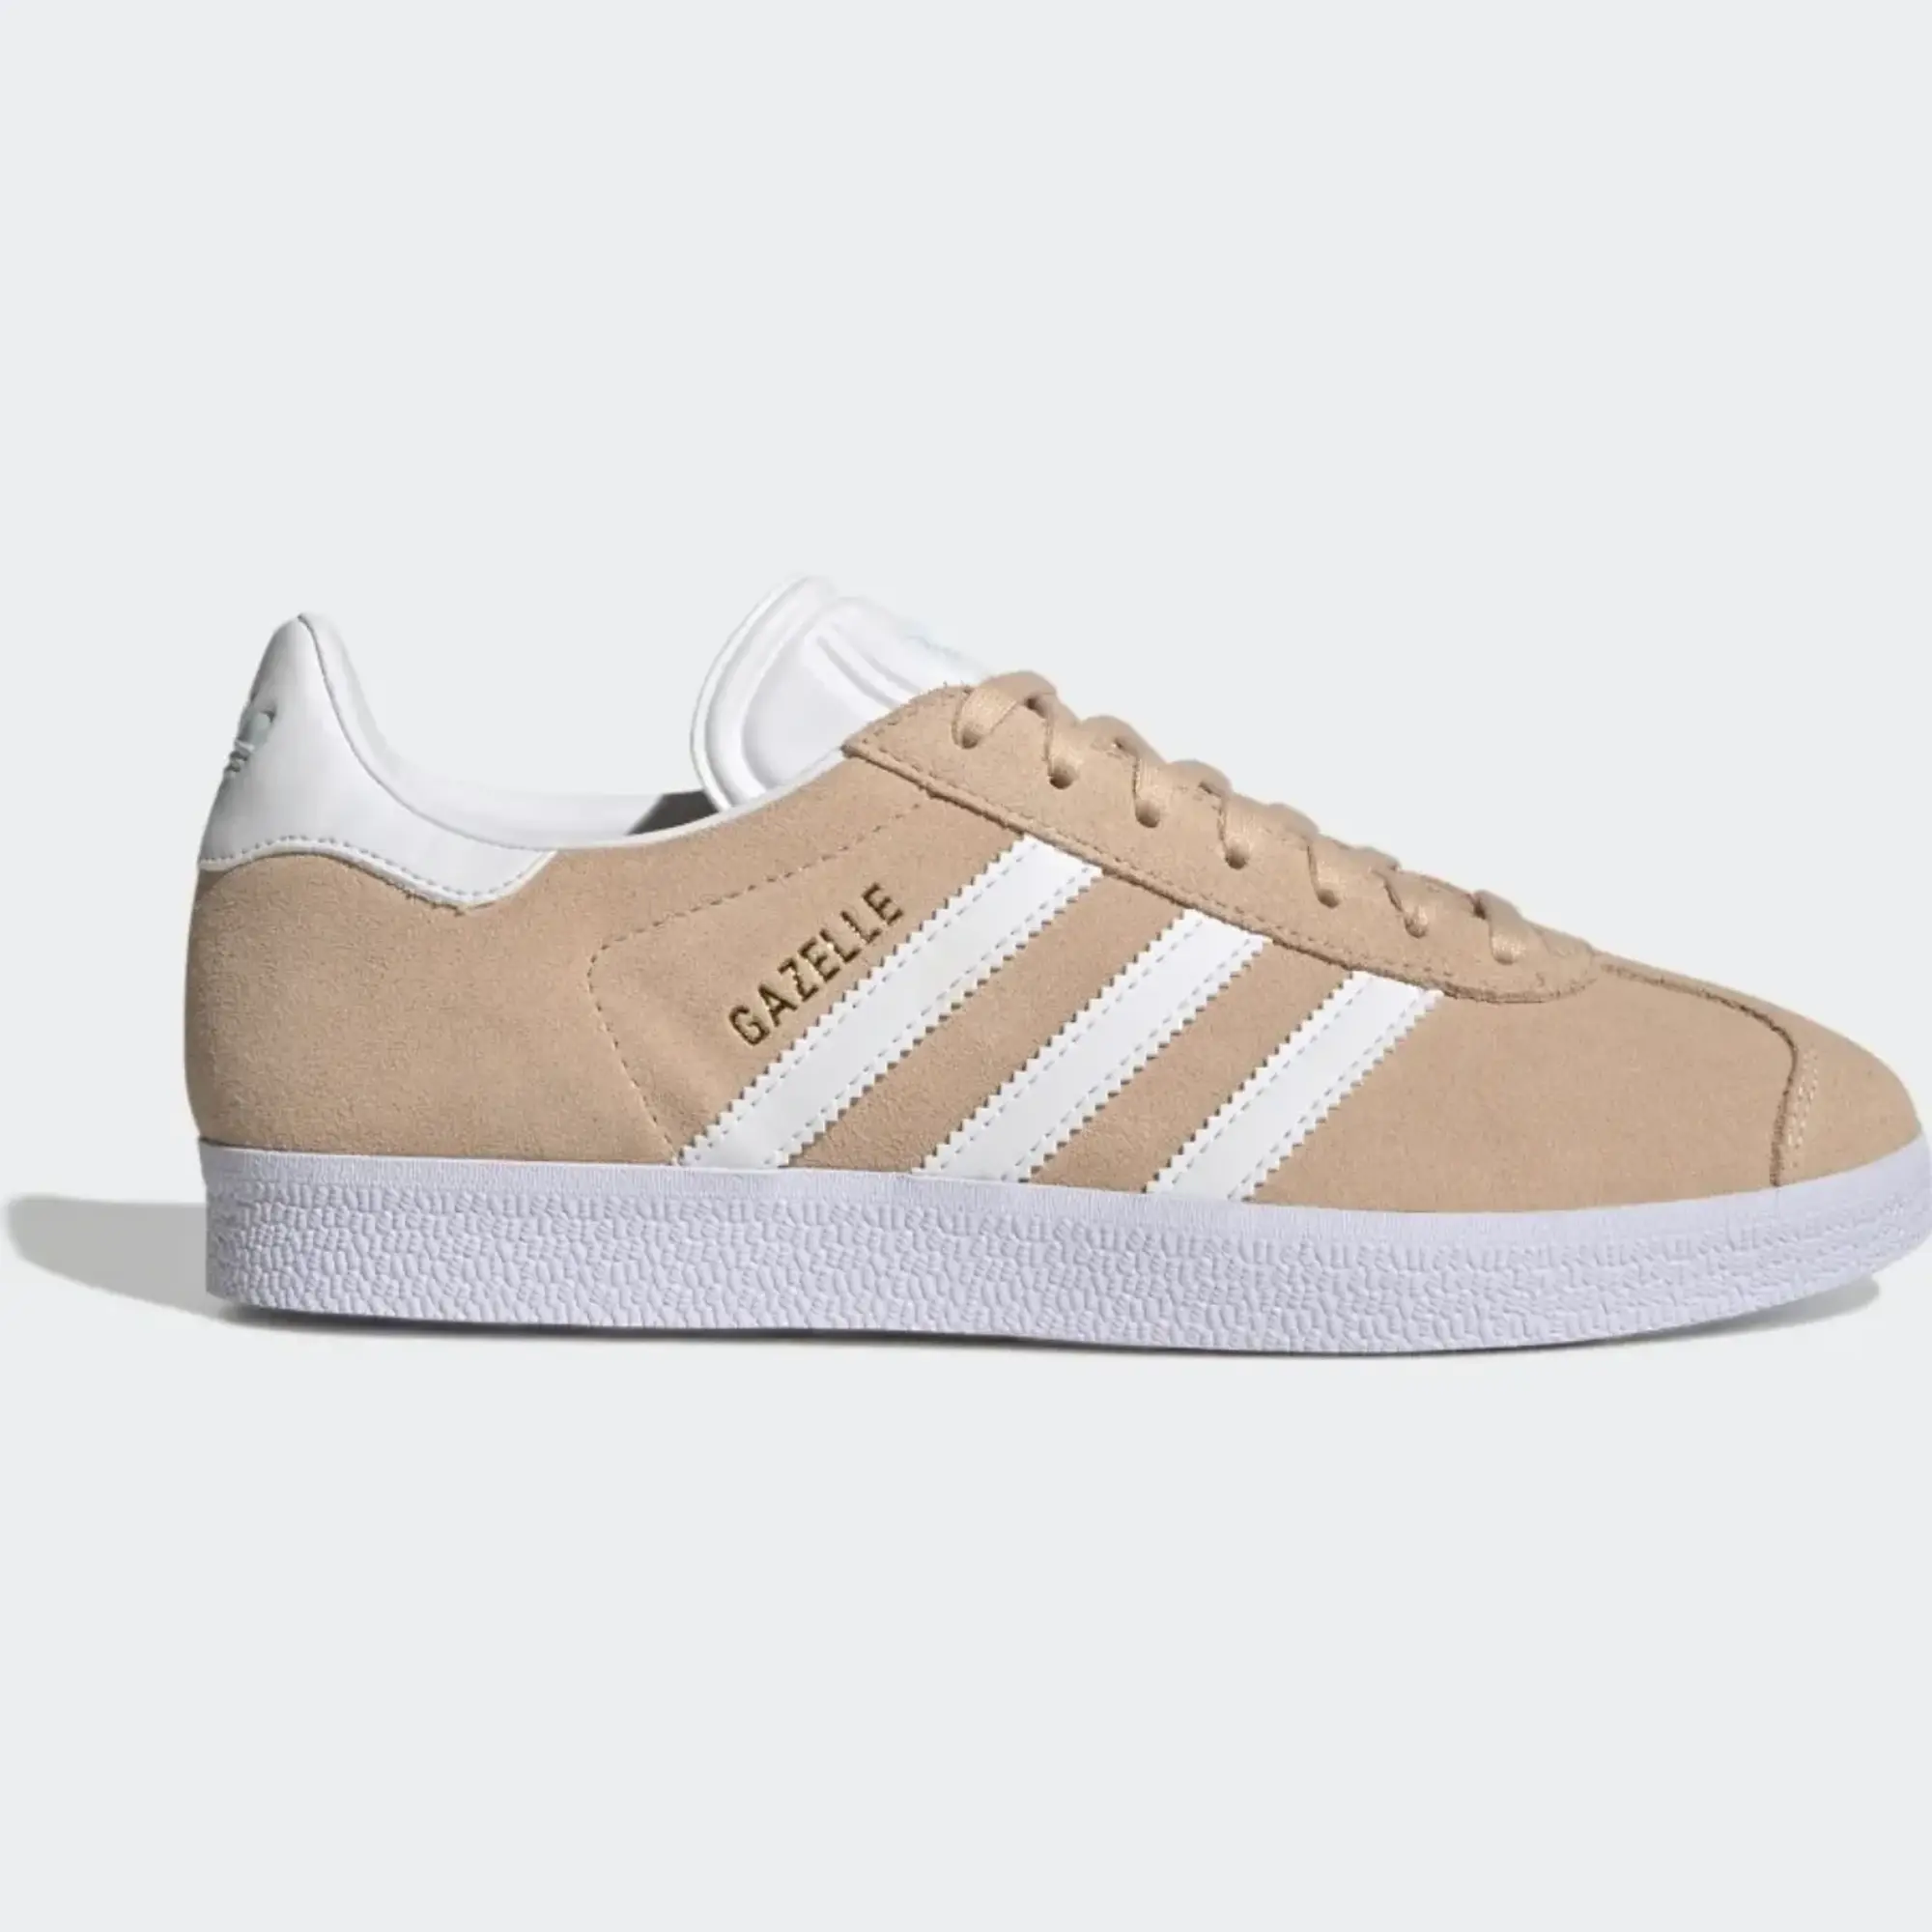 Adidas Gazelle Trainers Halo Blush White Amos Blue Suede,Black and White,Navy and White,Grey and White,Black,Red and White,Blue,Pink,Red,Purple,Grey,Multi,White,Green,Brown